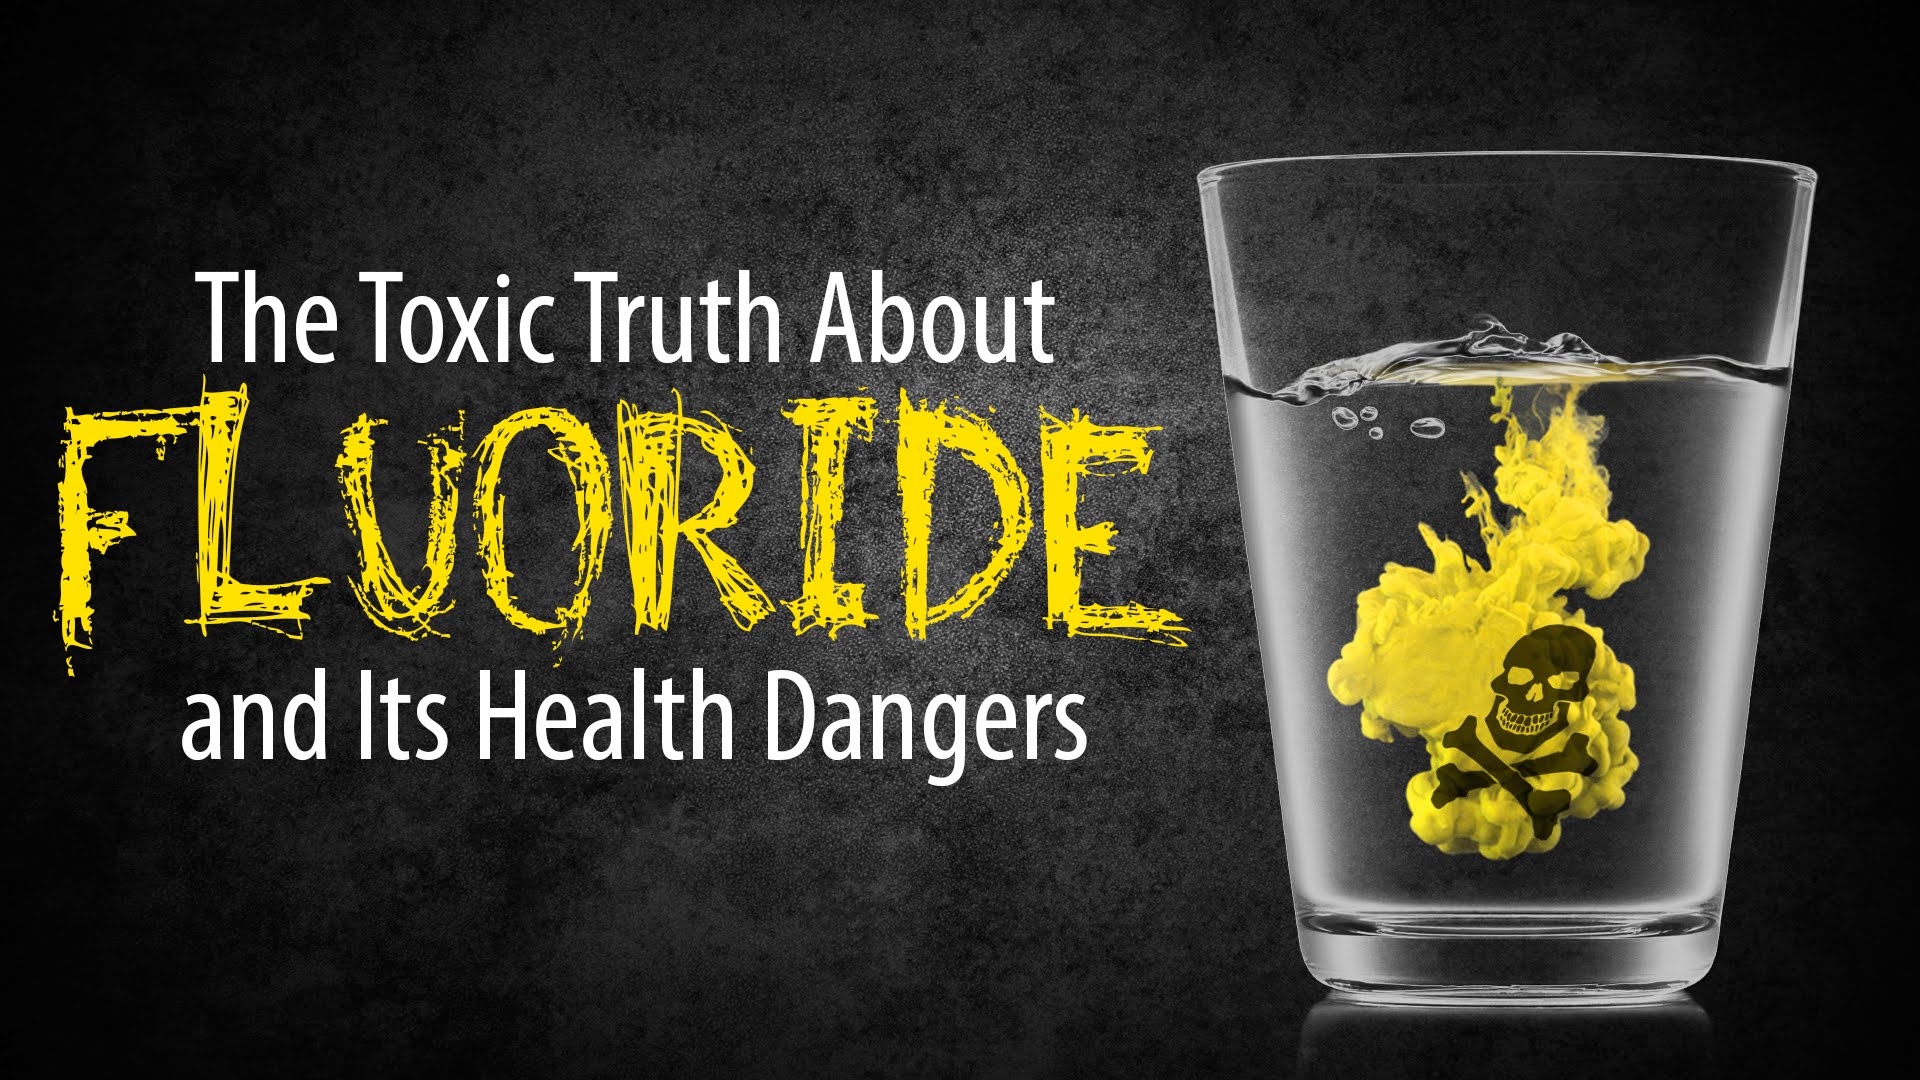 State Applauds Use of Fluoride, Despite Growing Health Concerns